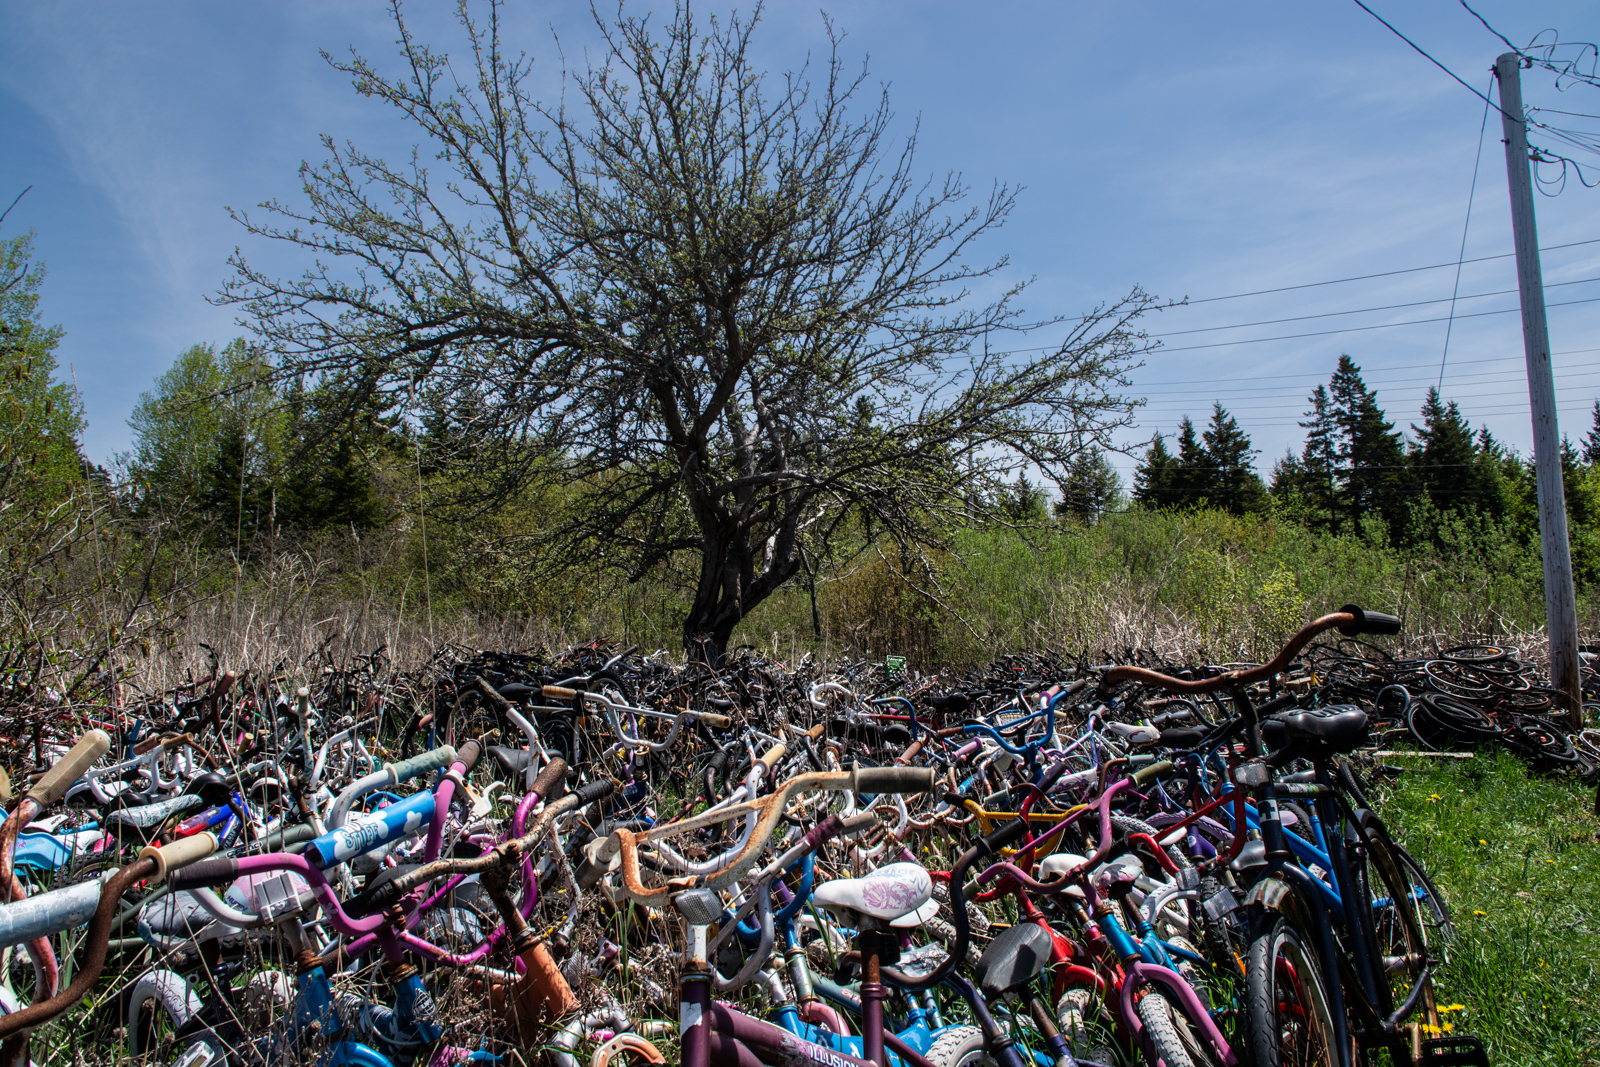 A lone tree surrounded by a whirlwind of bicycles next to his shop on the family property.